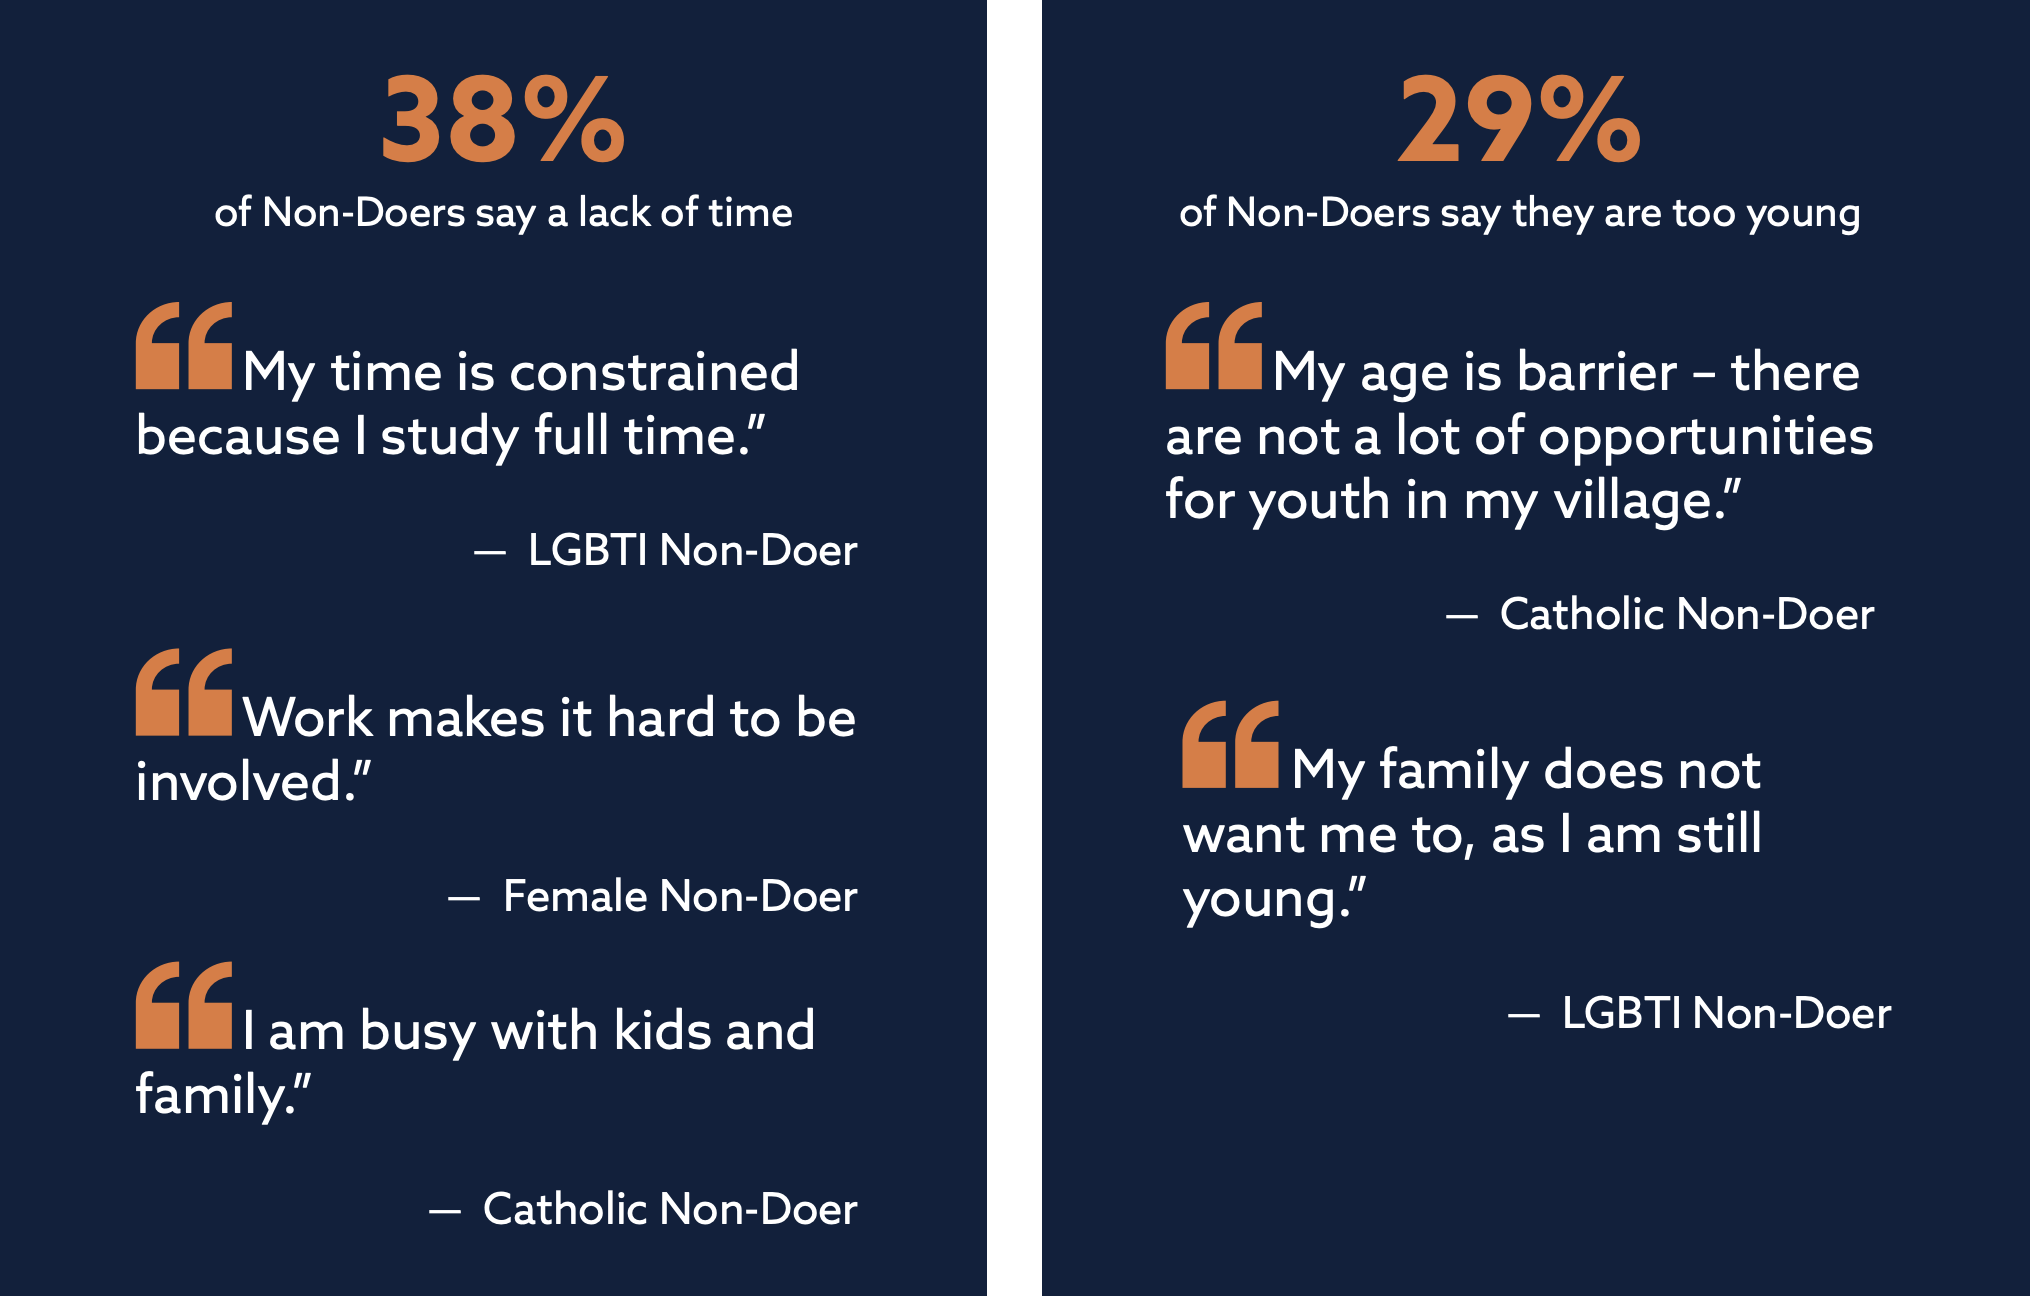 38% of Non-Doers say a lack of time.  “My time is constrained because I study full time.” — LGBTI Non-Doer; “Work makes it hard to be involved.” — Female Non-Doer; “I am busy with kids and family.” — Catholic Non-Doer.
29% of Non-Doers say they are too young.  “My age is barrier – there are not a lot of opportunities for youth in my village.” — Catholic Non-Doer; “My family does not want me to, as I am still young.” — LGBTI Non-Doer